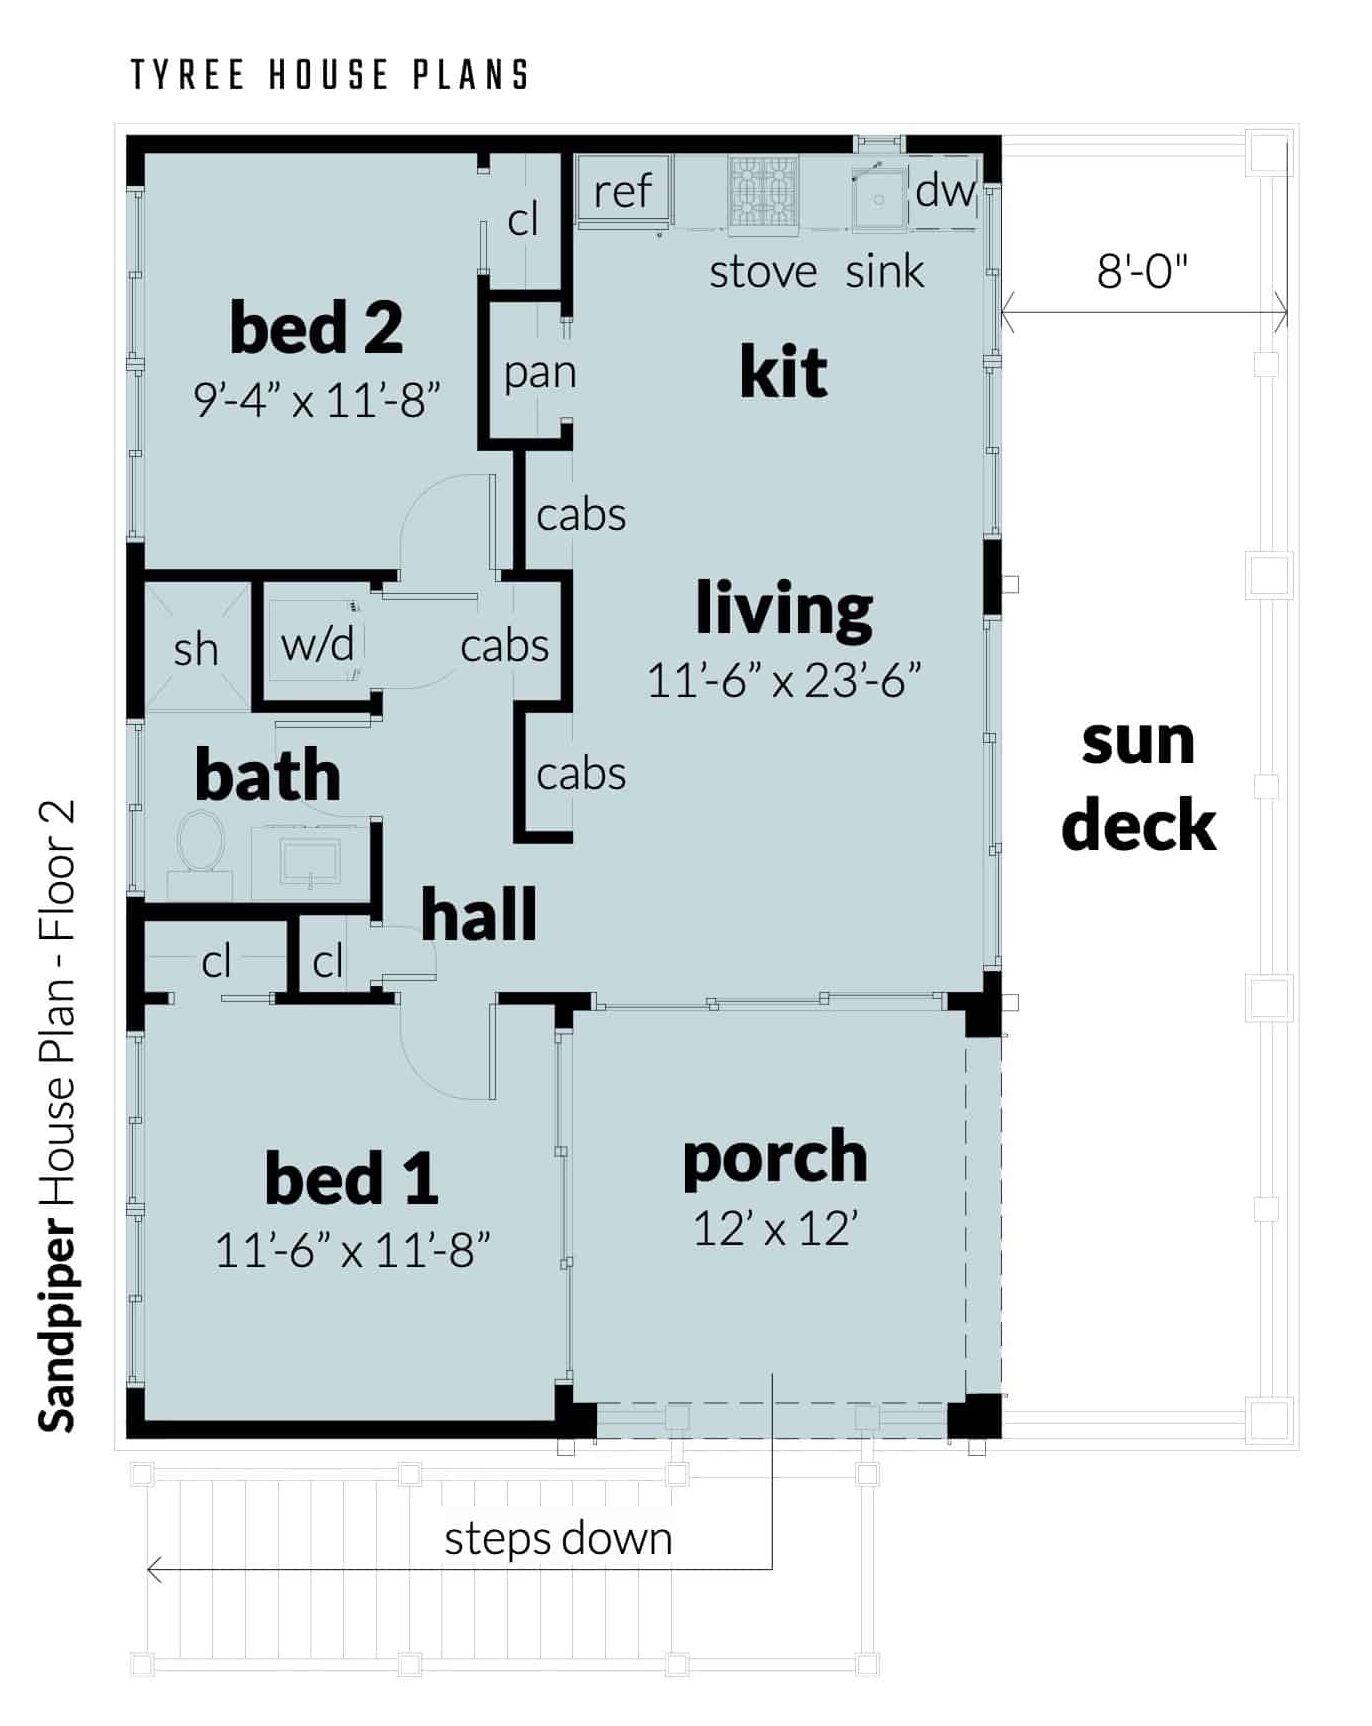 Main level floor plan. Sandpiper by Tyree House Plans.